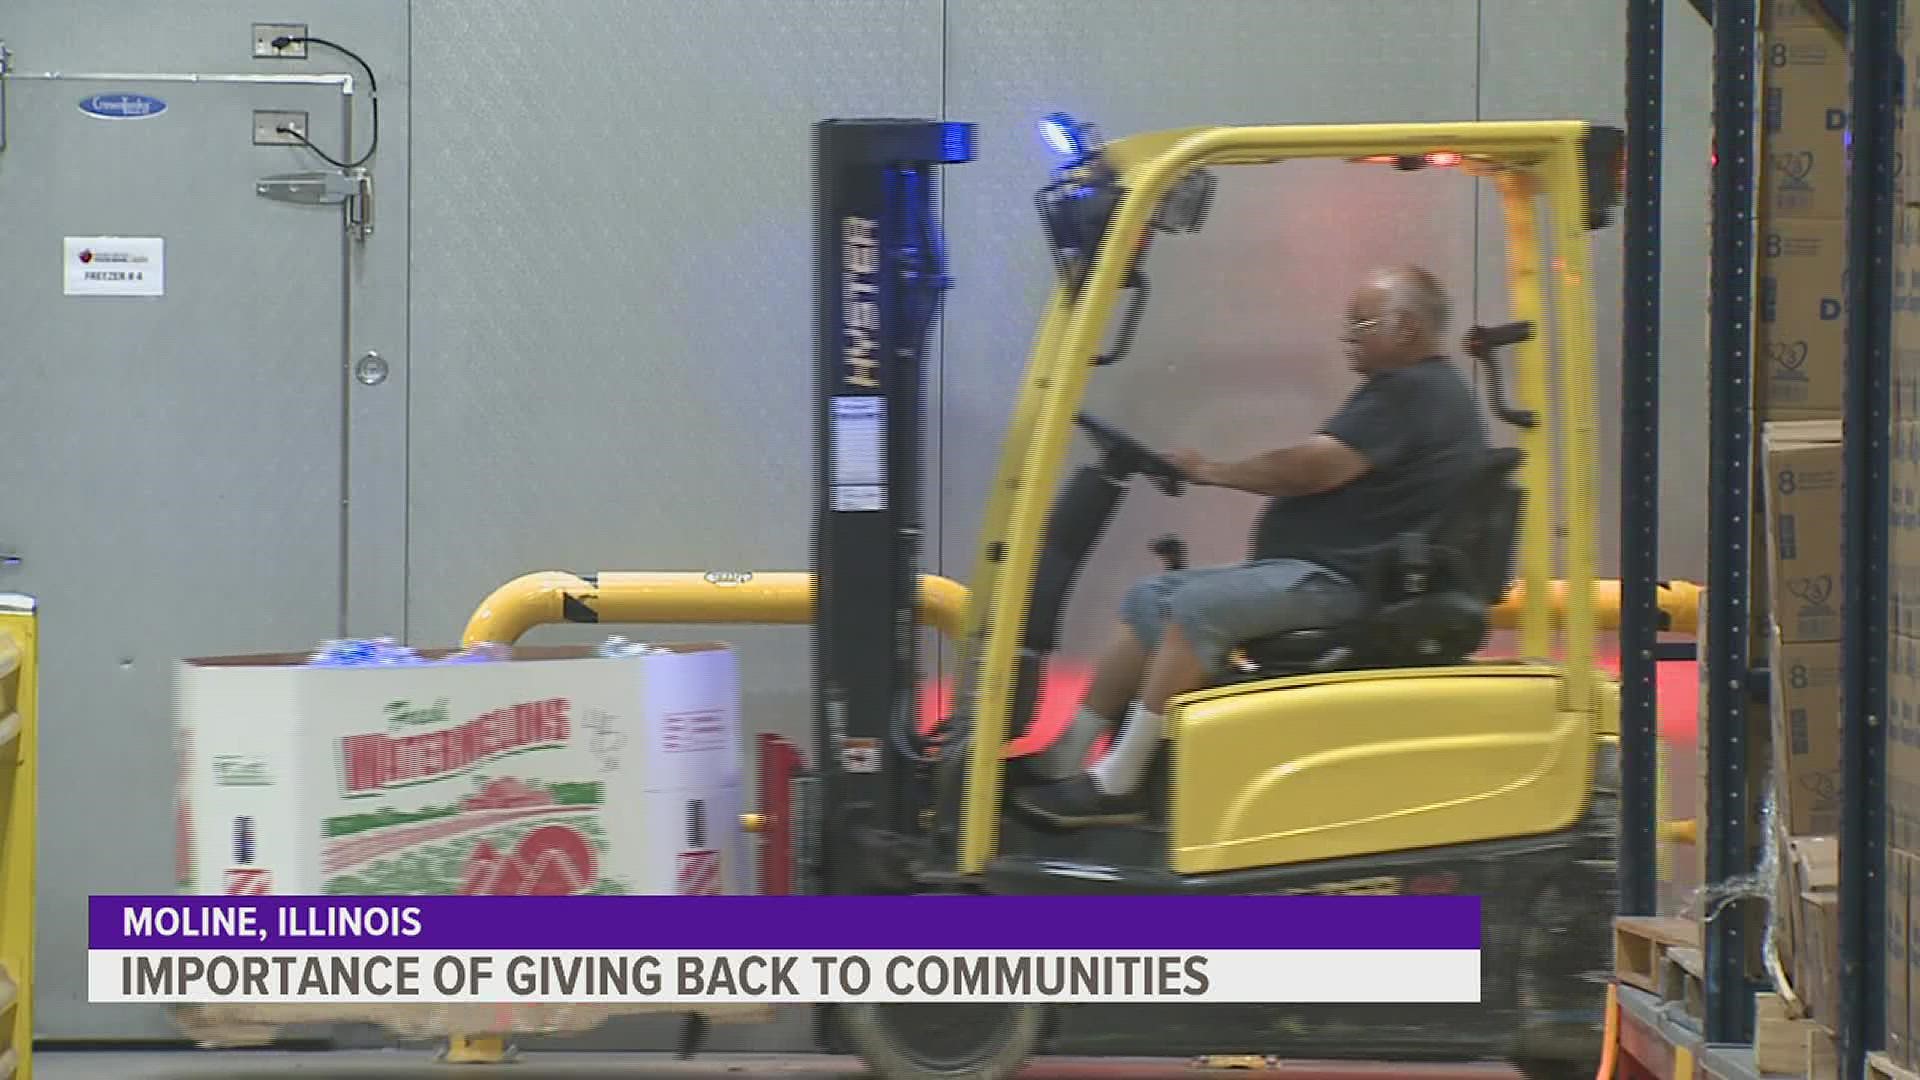 Local Non-Profit organizations discuss the importance of giving back to communities